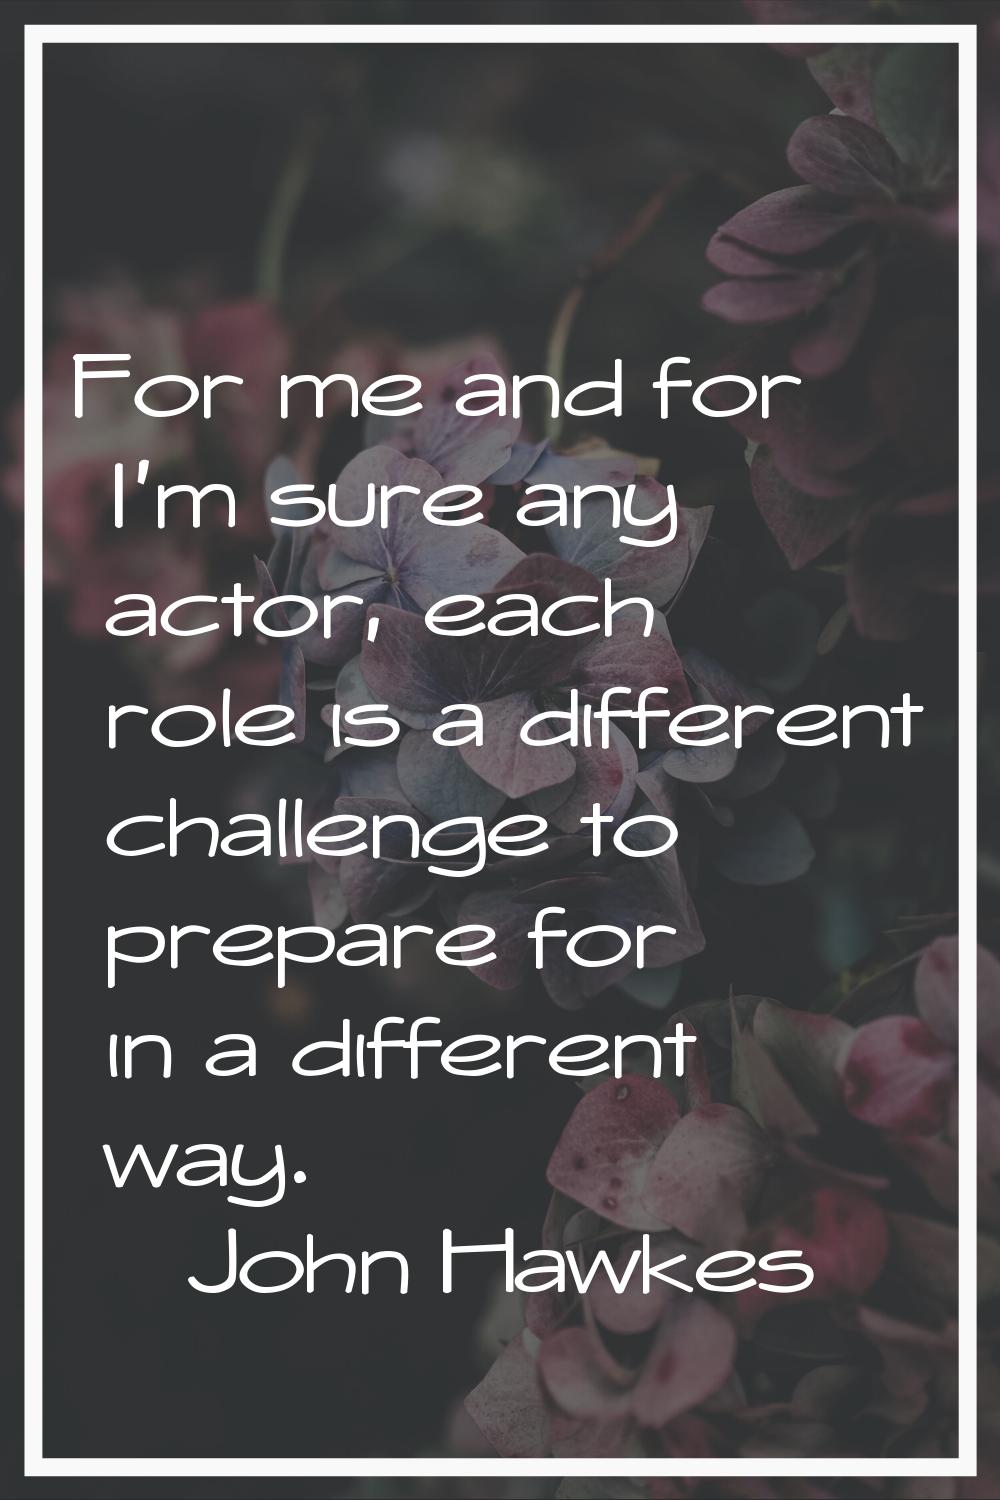 For me and for I'm sure any actor, each role is a different challenge to prepare for in a different